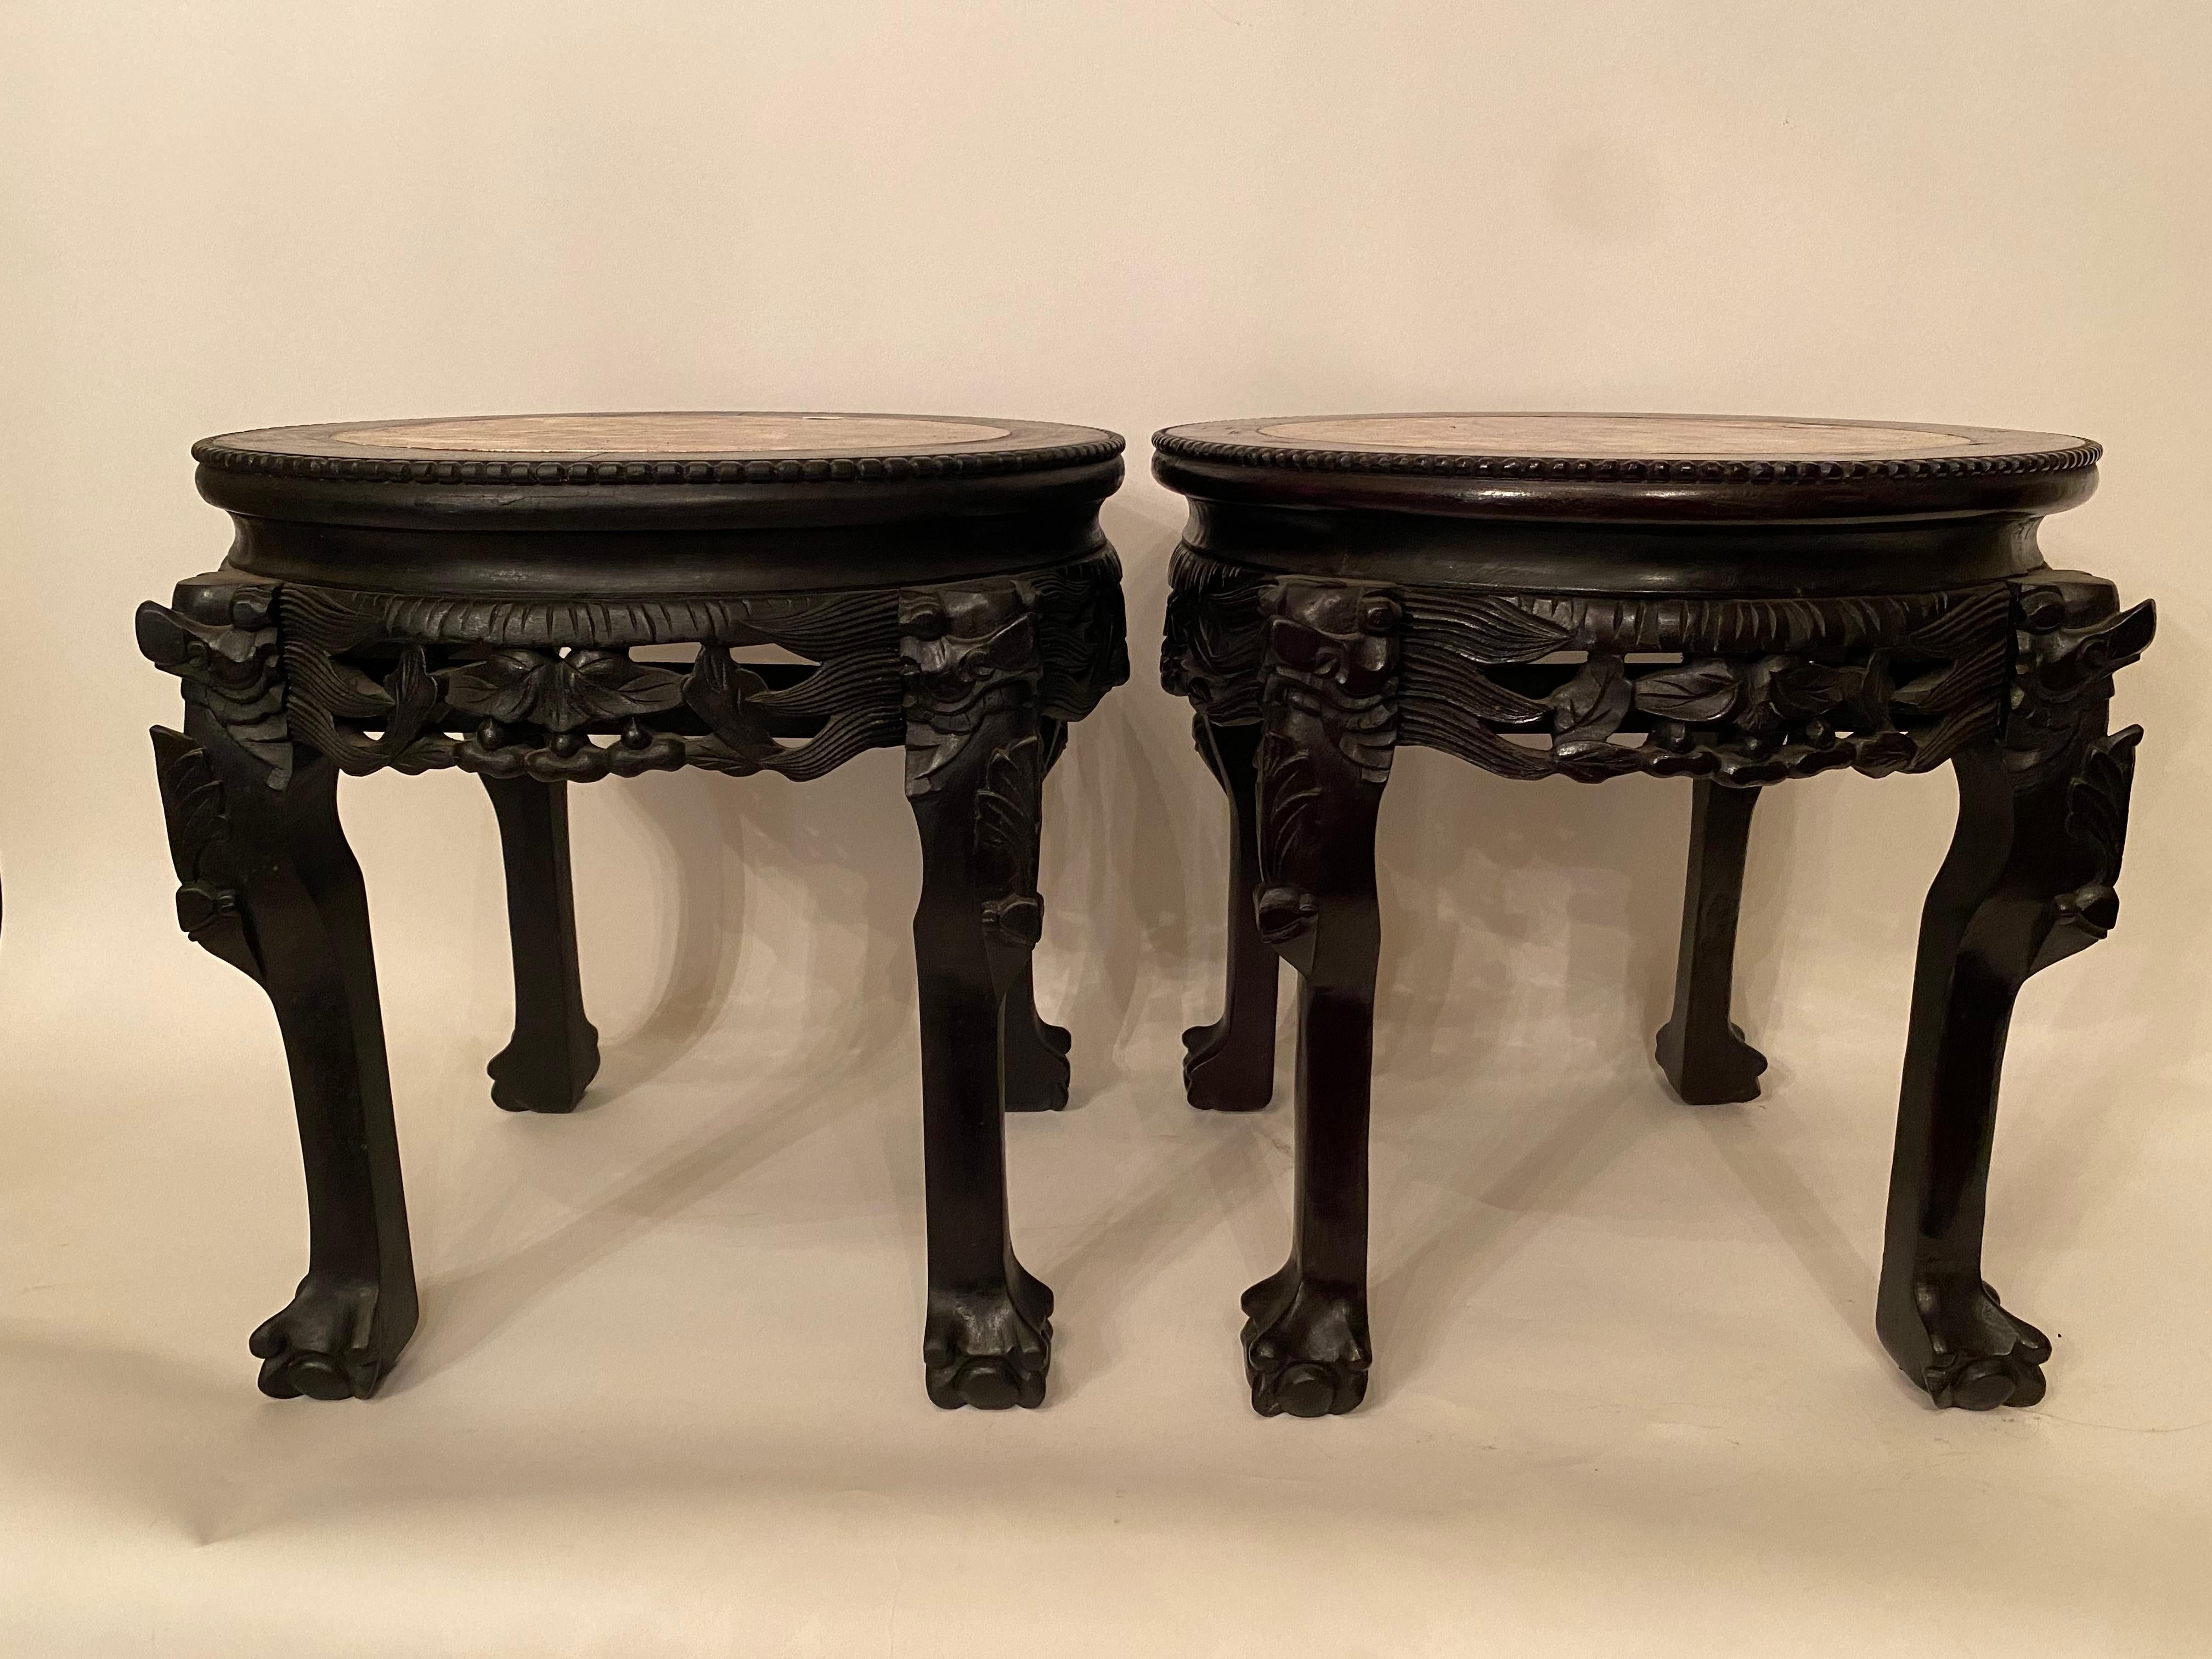 Pair of antique Chinese hardwood flower stands rouge marble top insert, 20th century. Measures: H 18”, D 20”.